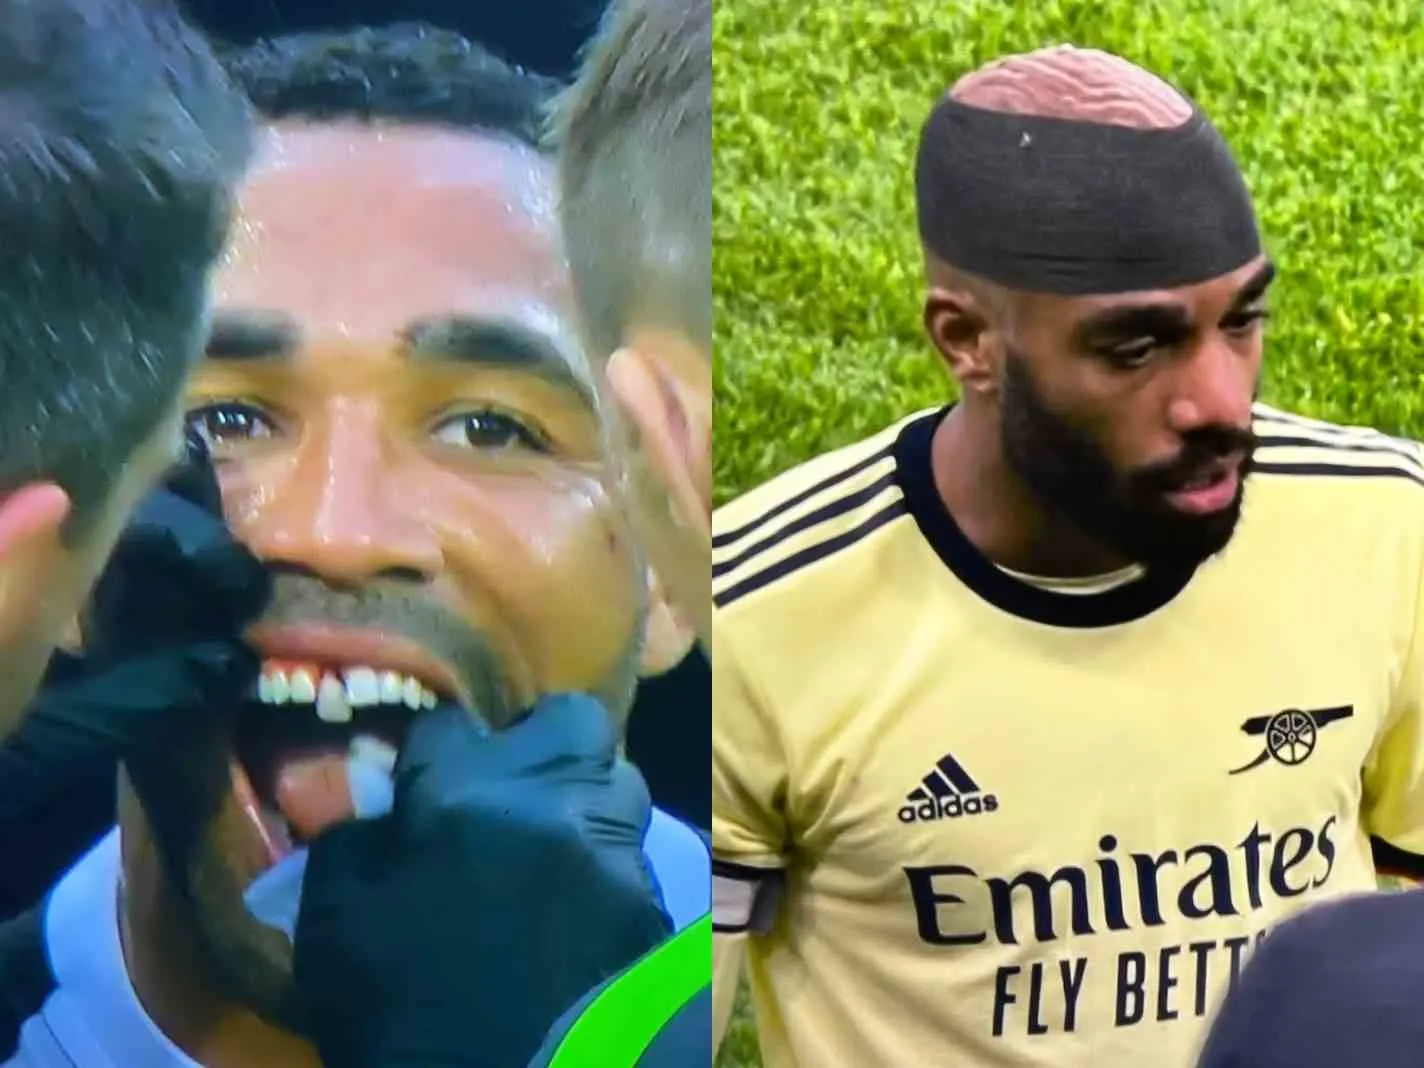 In this image - Callum Wilson has tooth hanging out as Alexandre Lacazette appears to reveal his brain